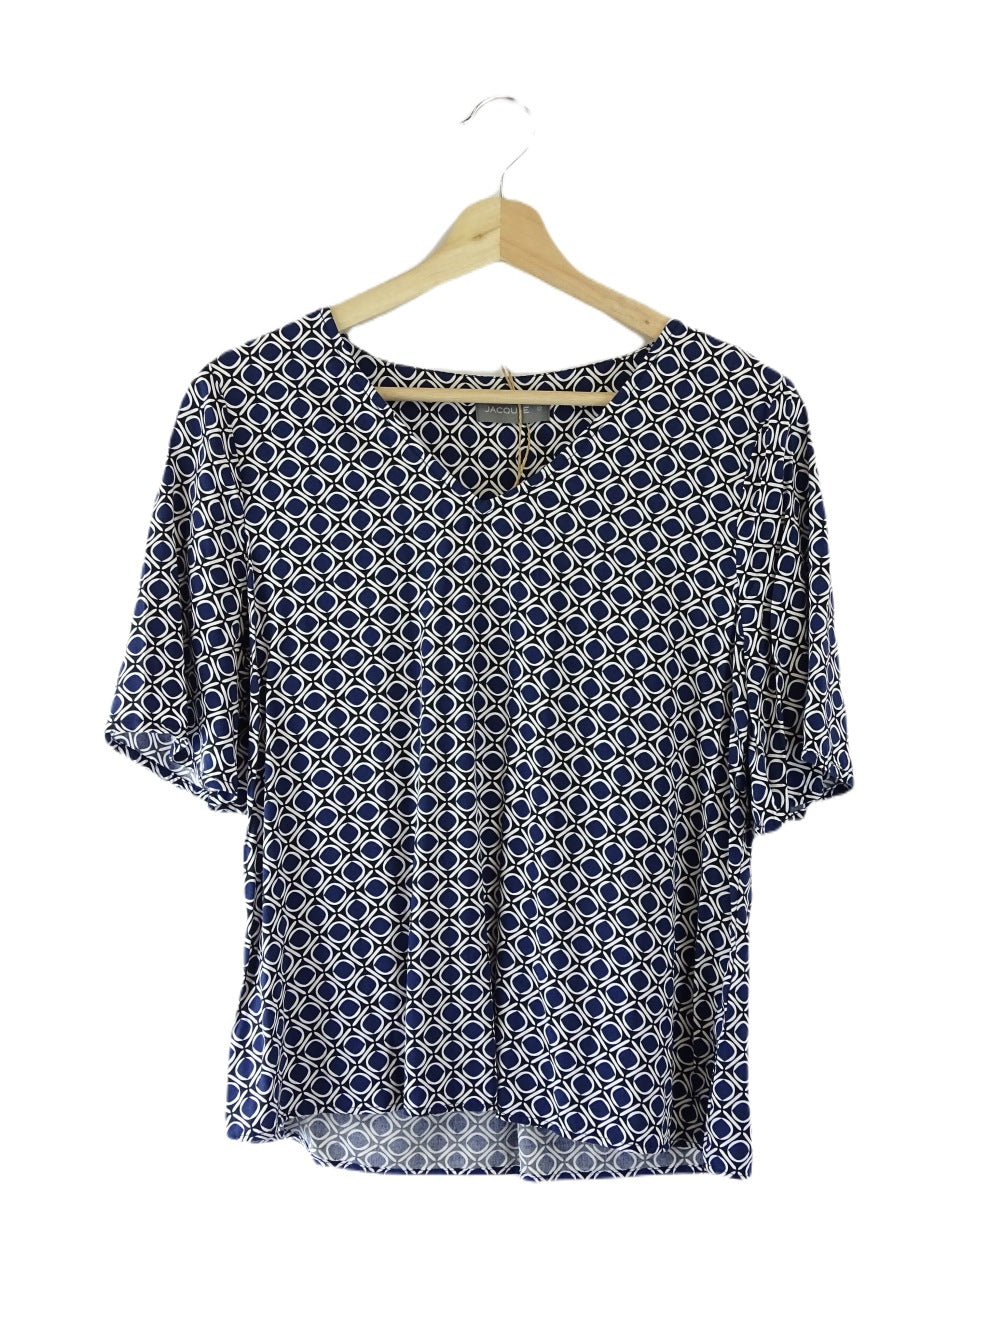 Jacquie E Blue And White Patterned Top 12